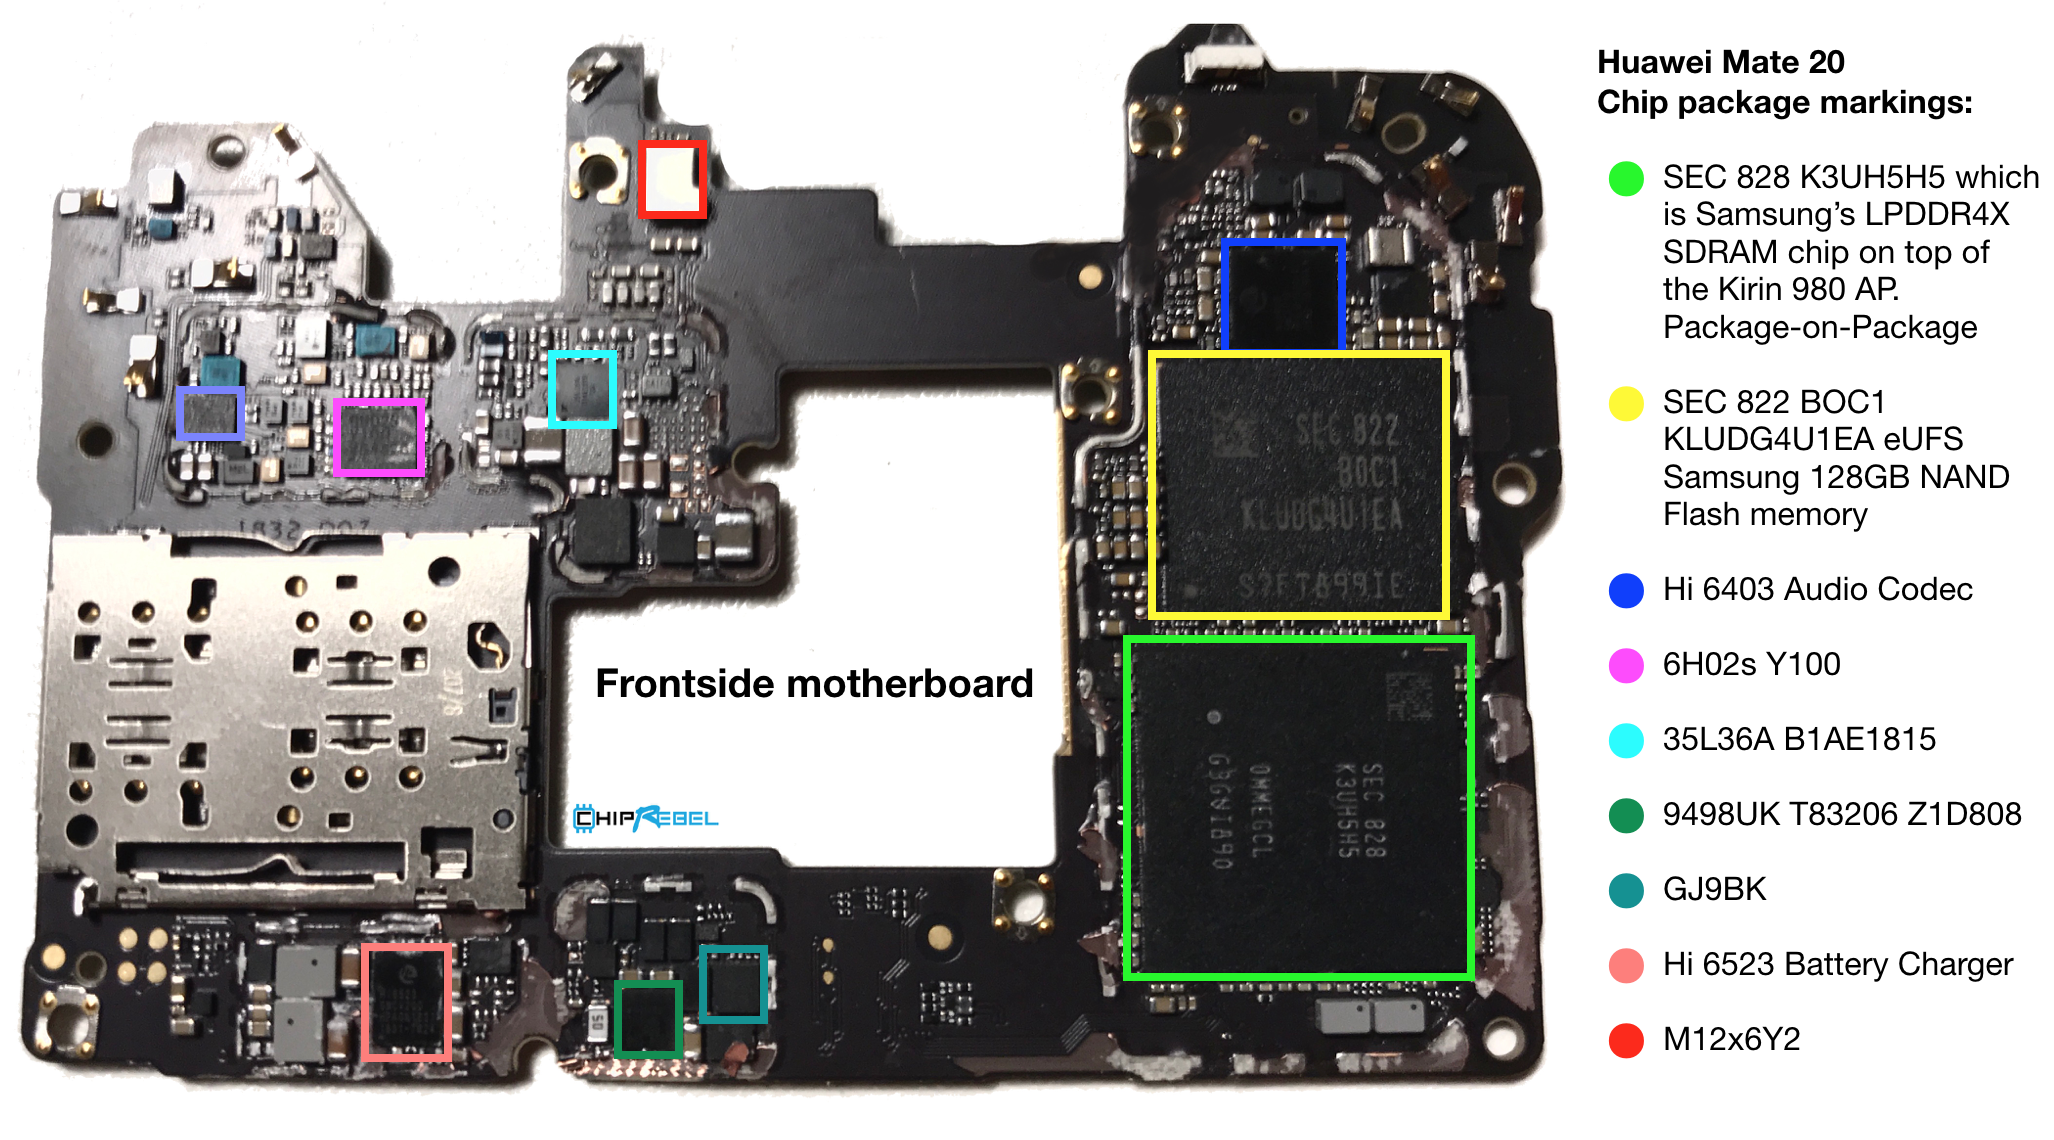 Huawei-Mate-20-motherboard-frontside.png